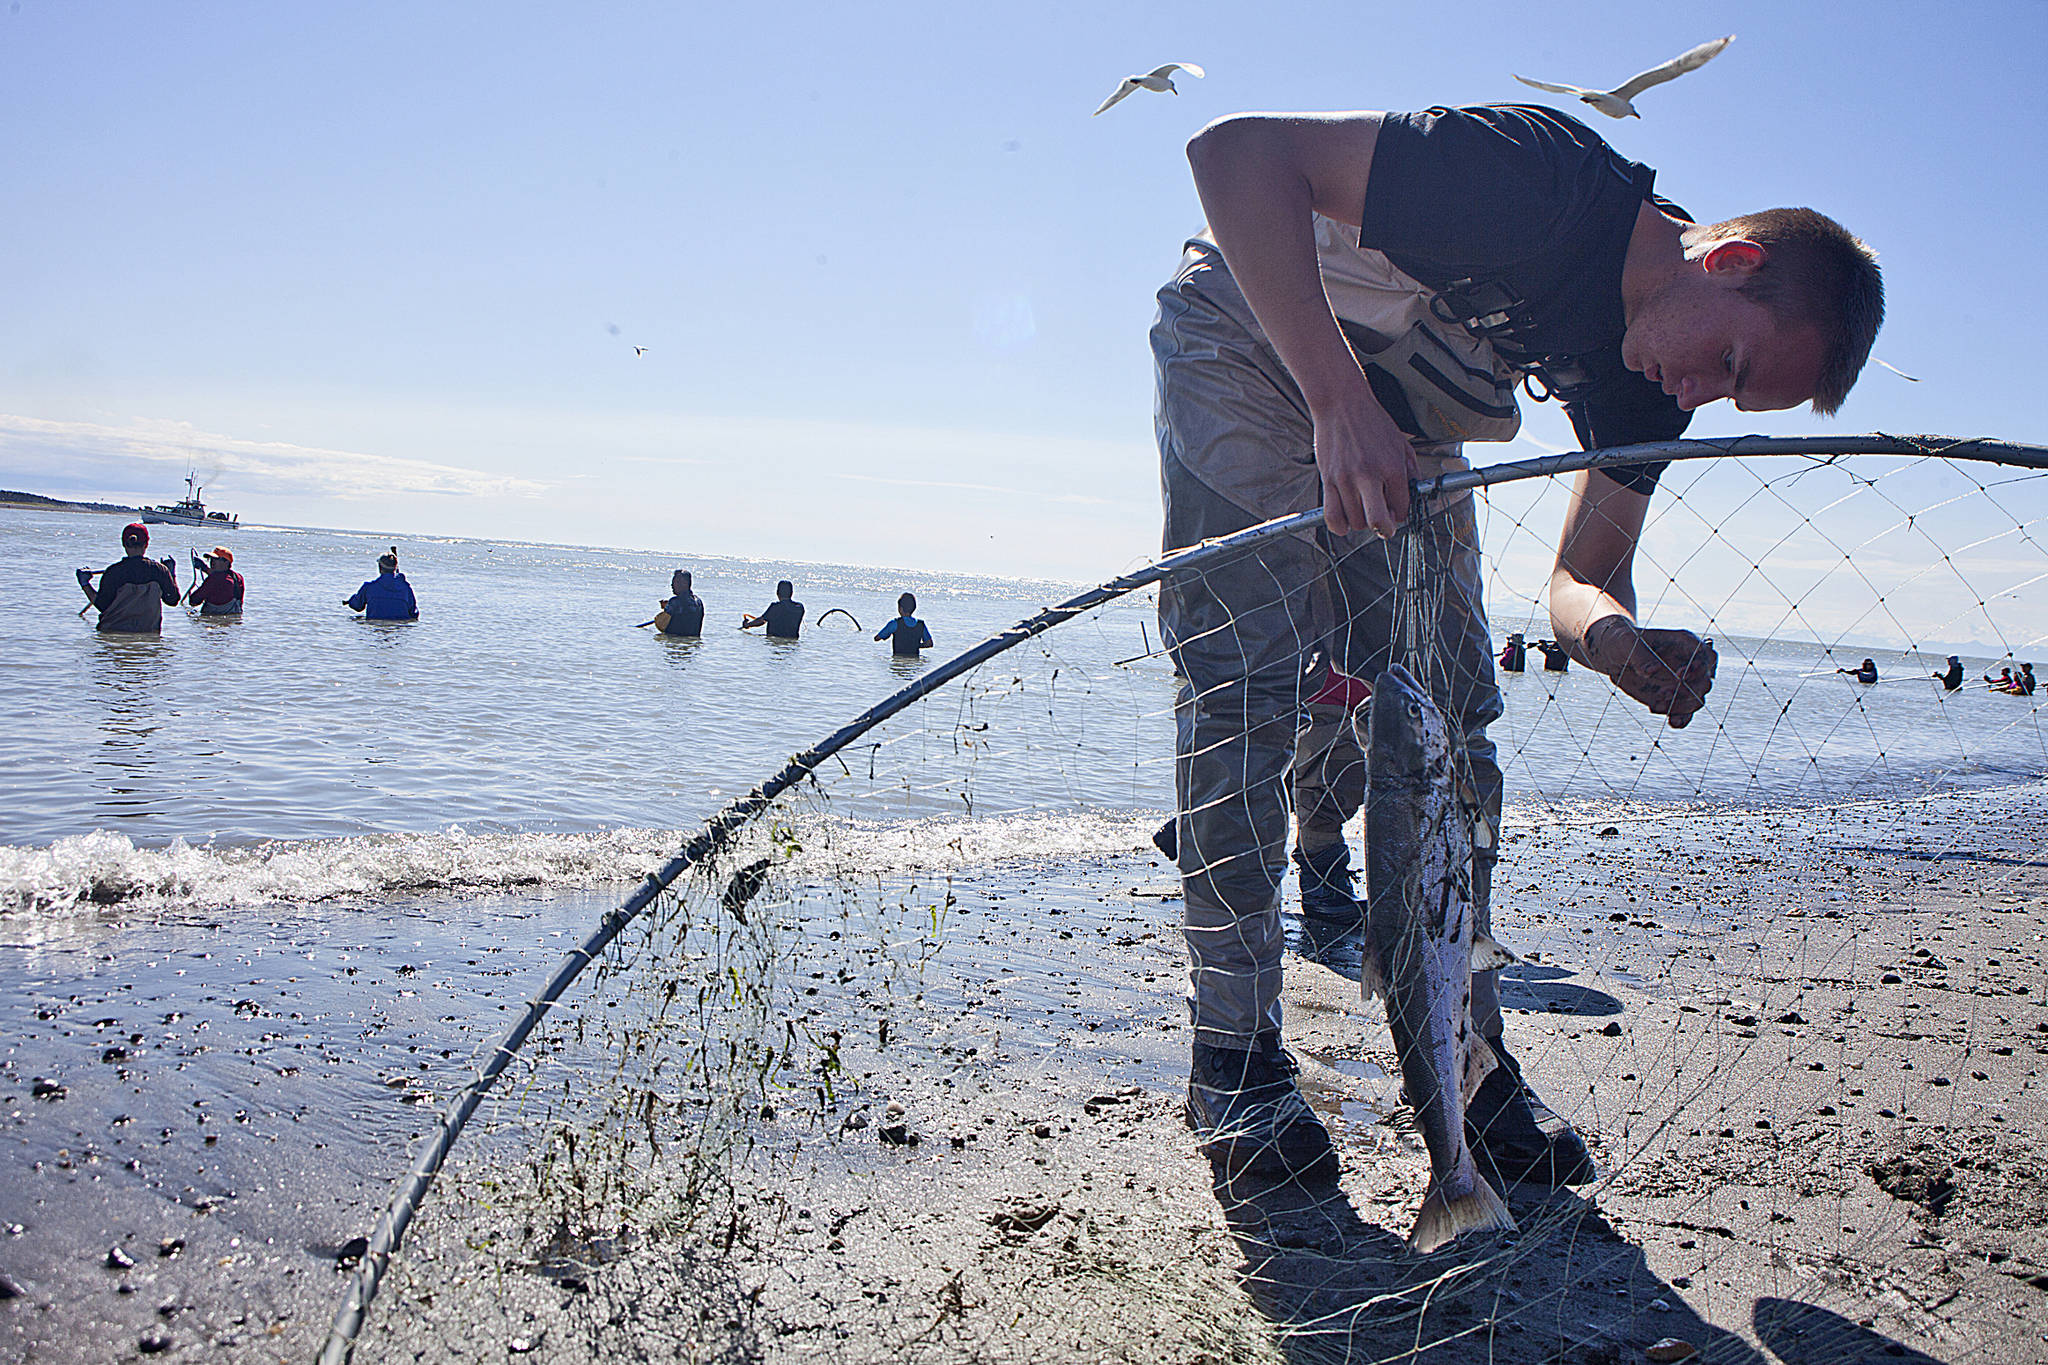 Matthew Dollick, of Wasilla, untangles a sockeye from his dipnet on July 11, 2015 in Kenai. The state Board of Fisheries discussed proposals affecting the Kenai and Kasilof personal-use fisheries over the weekend. (Peninsula Clarion file photo)